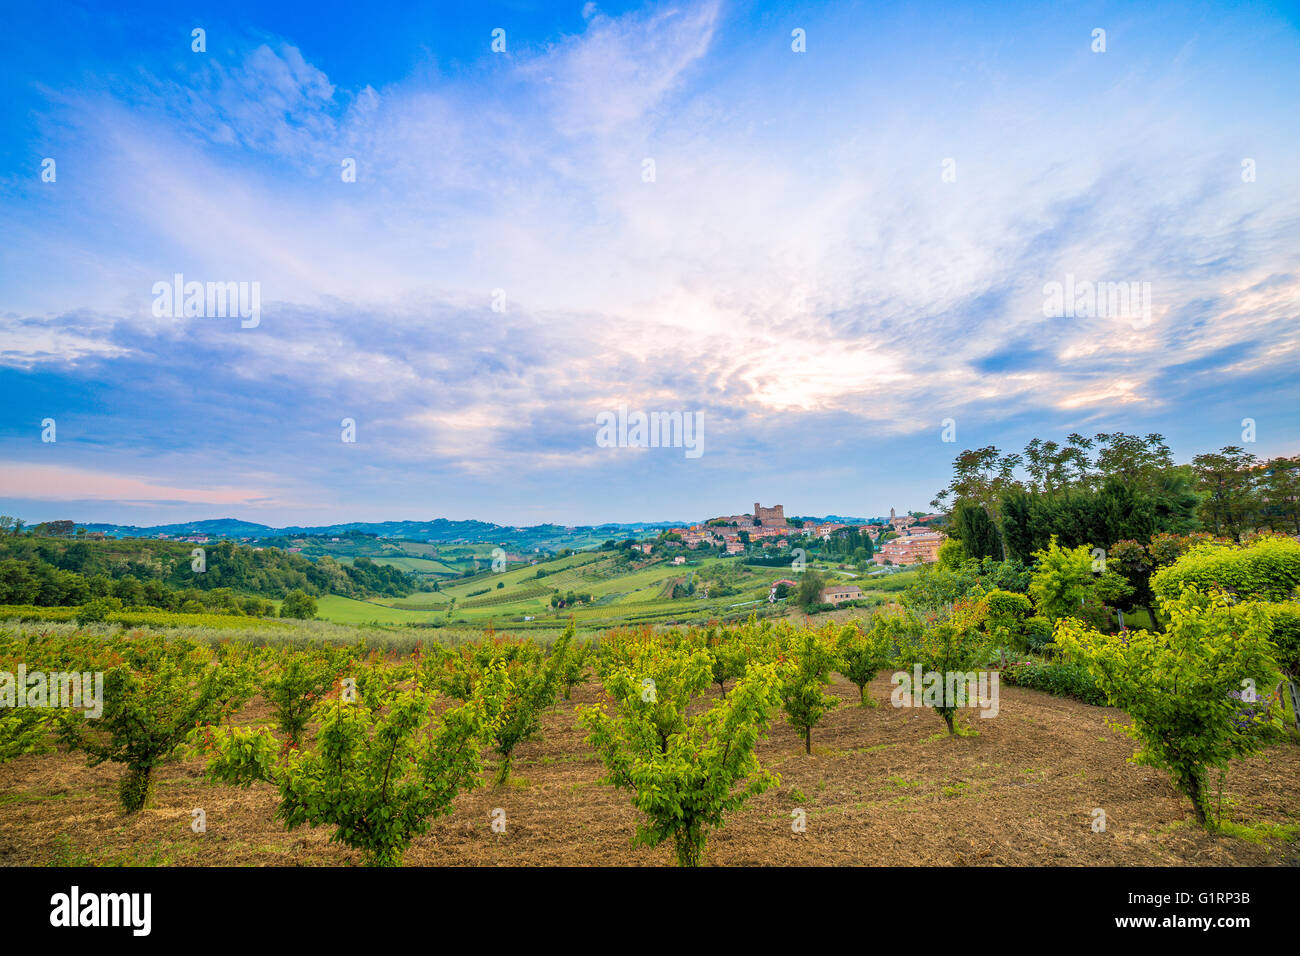 panorama of cultivated fields on the hills of Emilia Romagna dominated by Malatestian Castle, medieval fortress dating back to 1200 AD, of Longiano, Italy Stock Photo